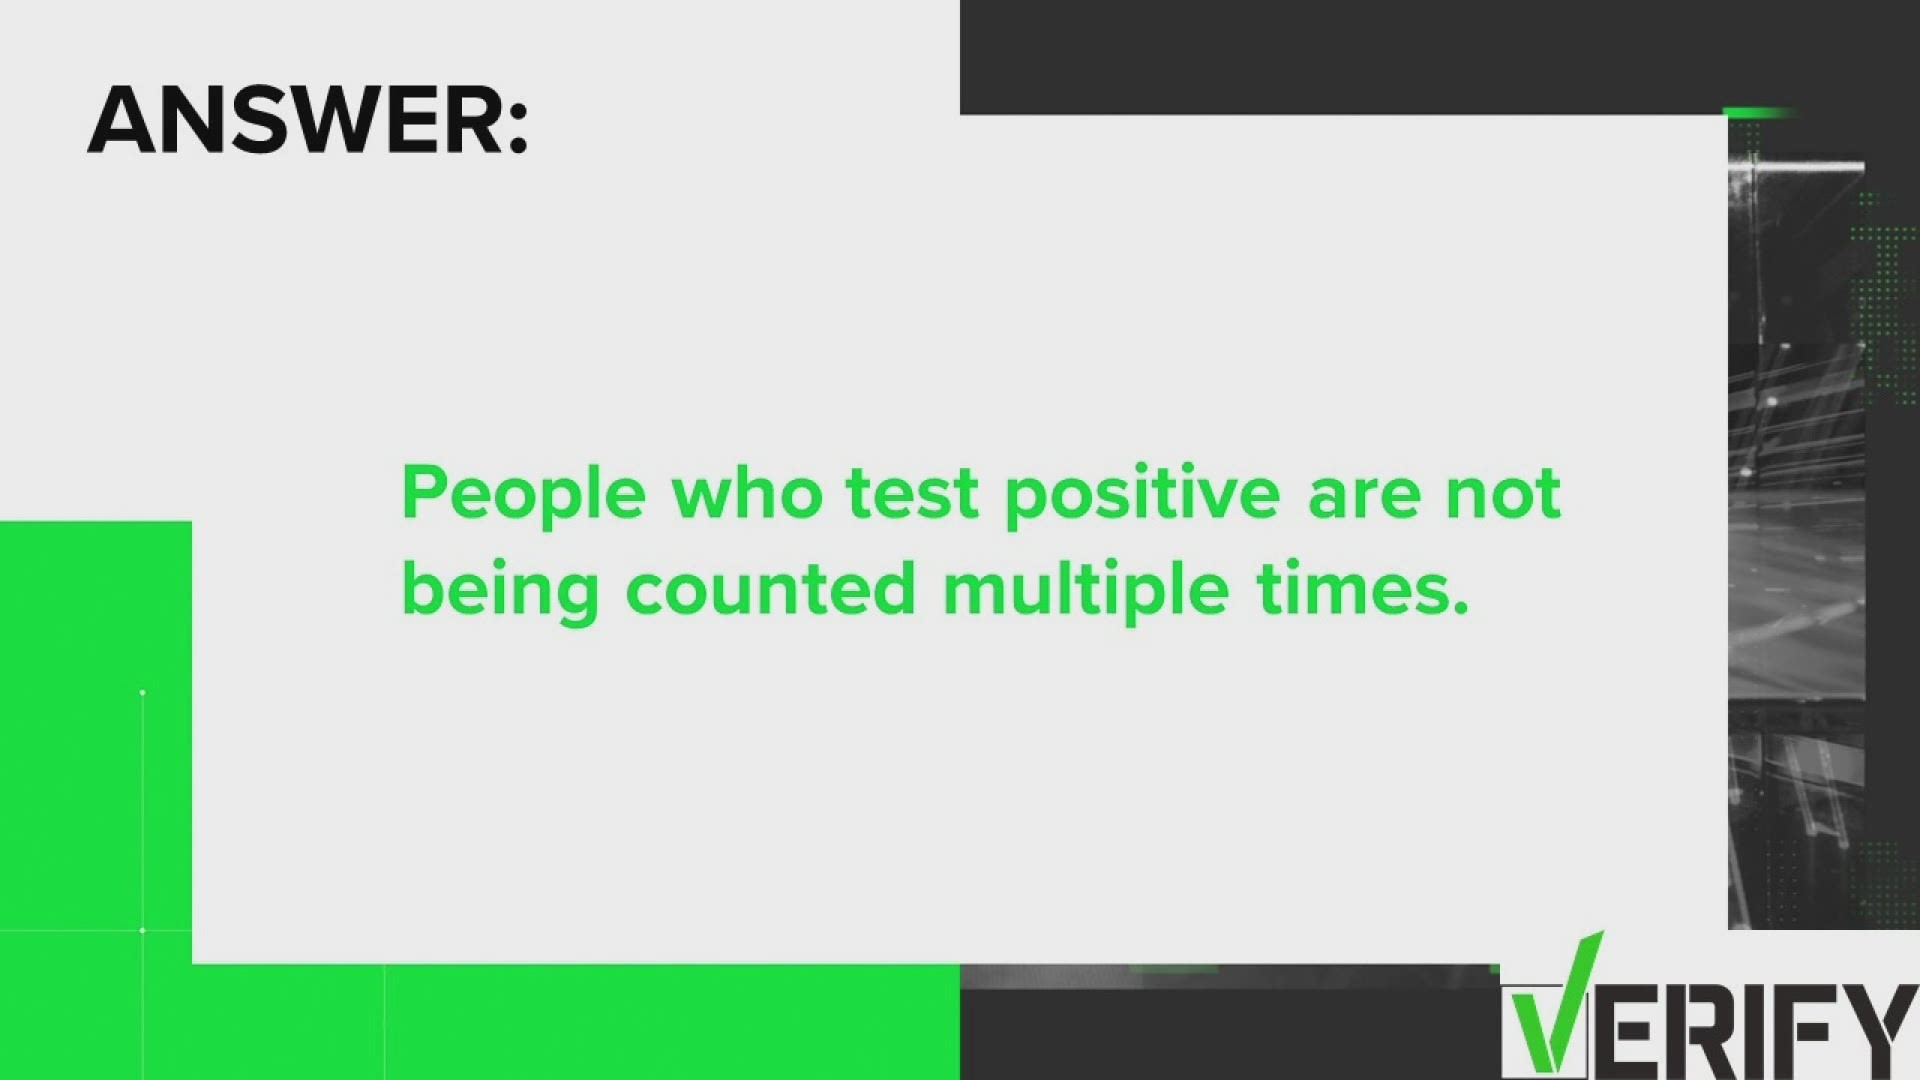 We've got questions about whether people who test positive for COVID-19 twice are counted twice. The answer: they're not.